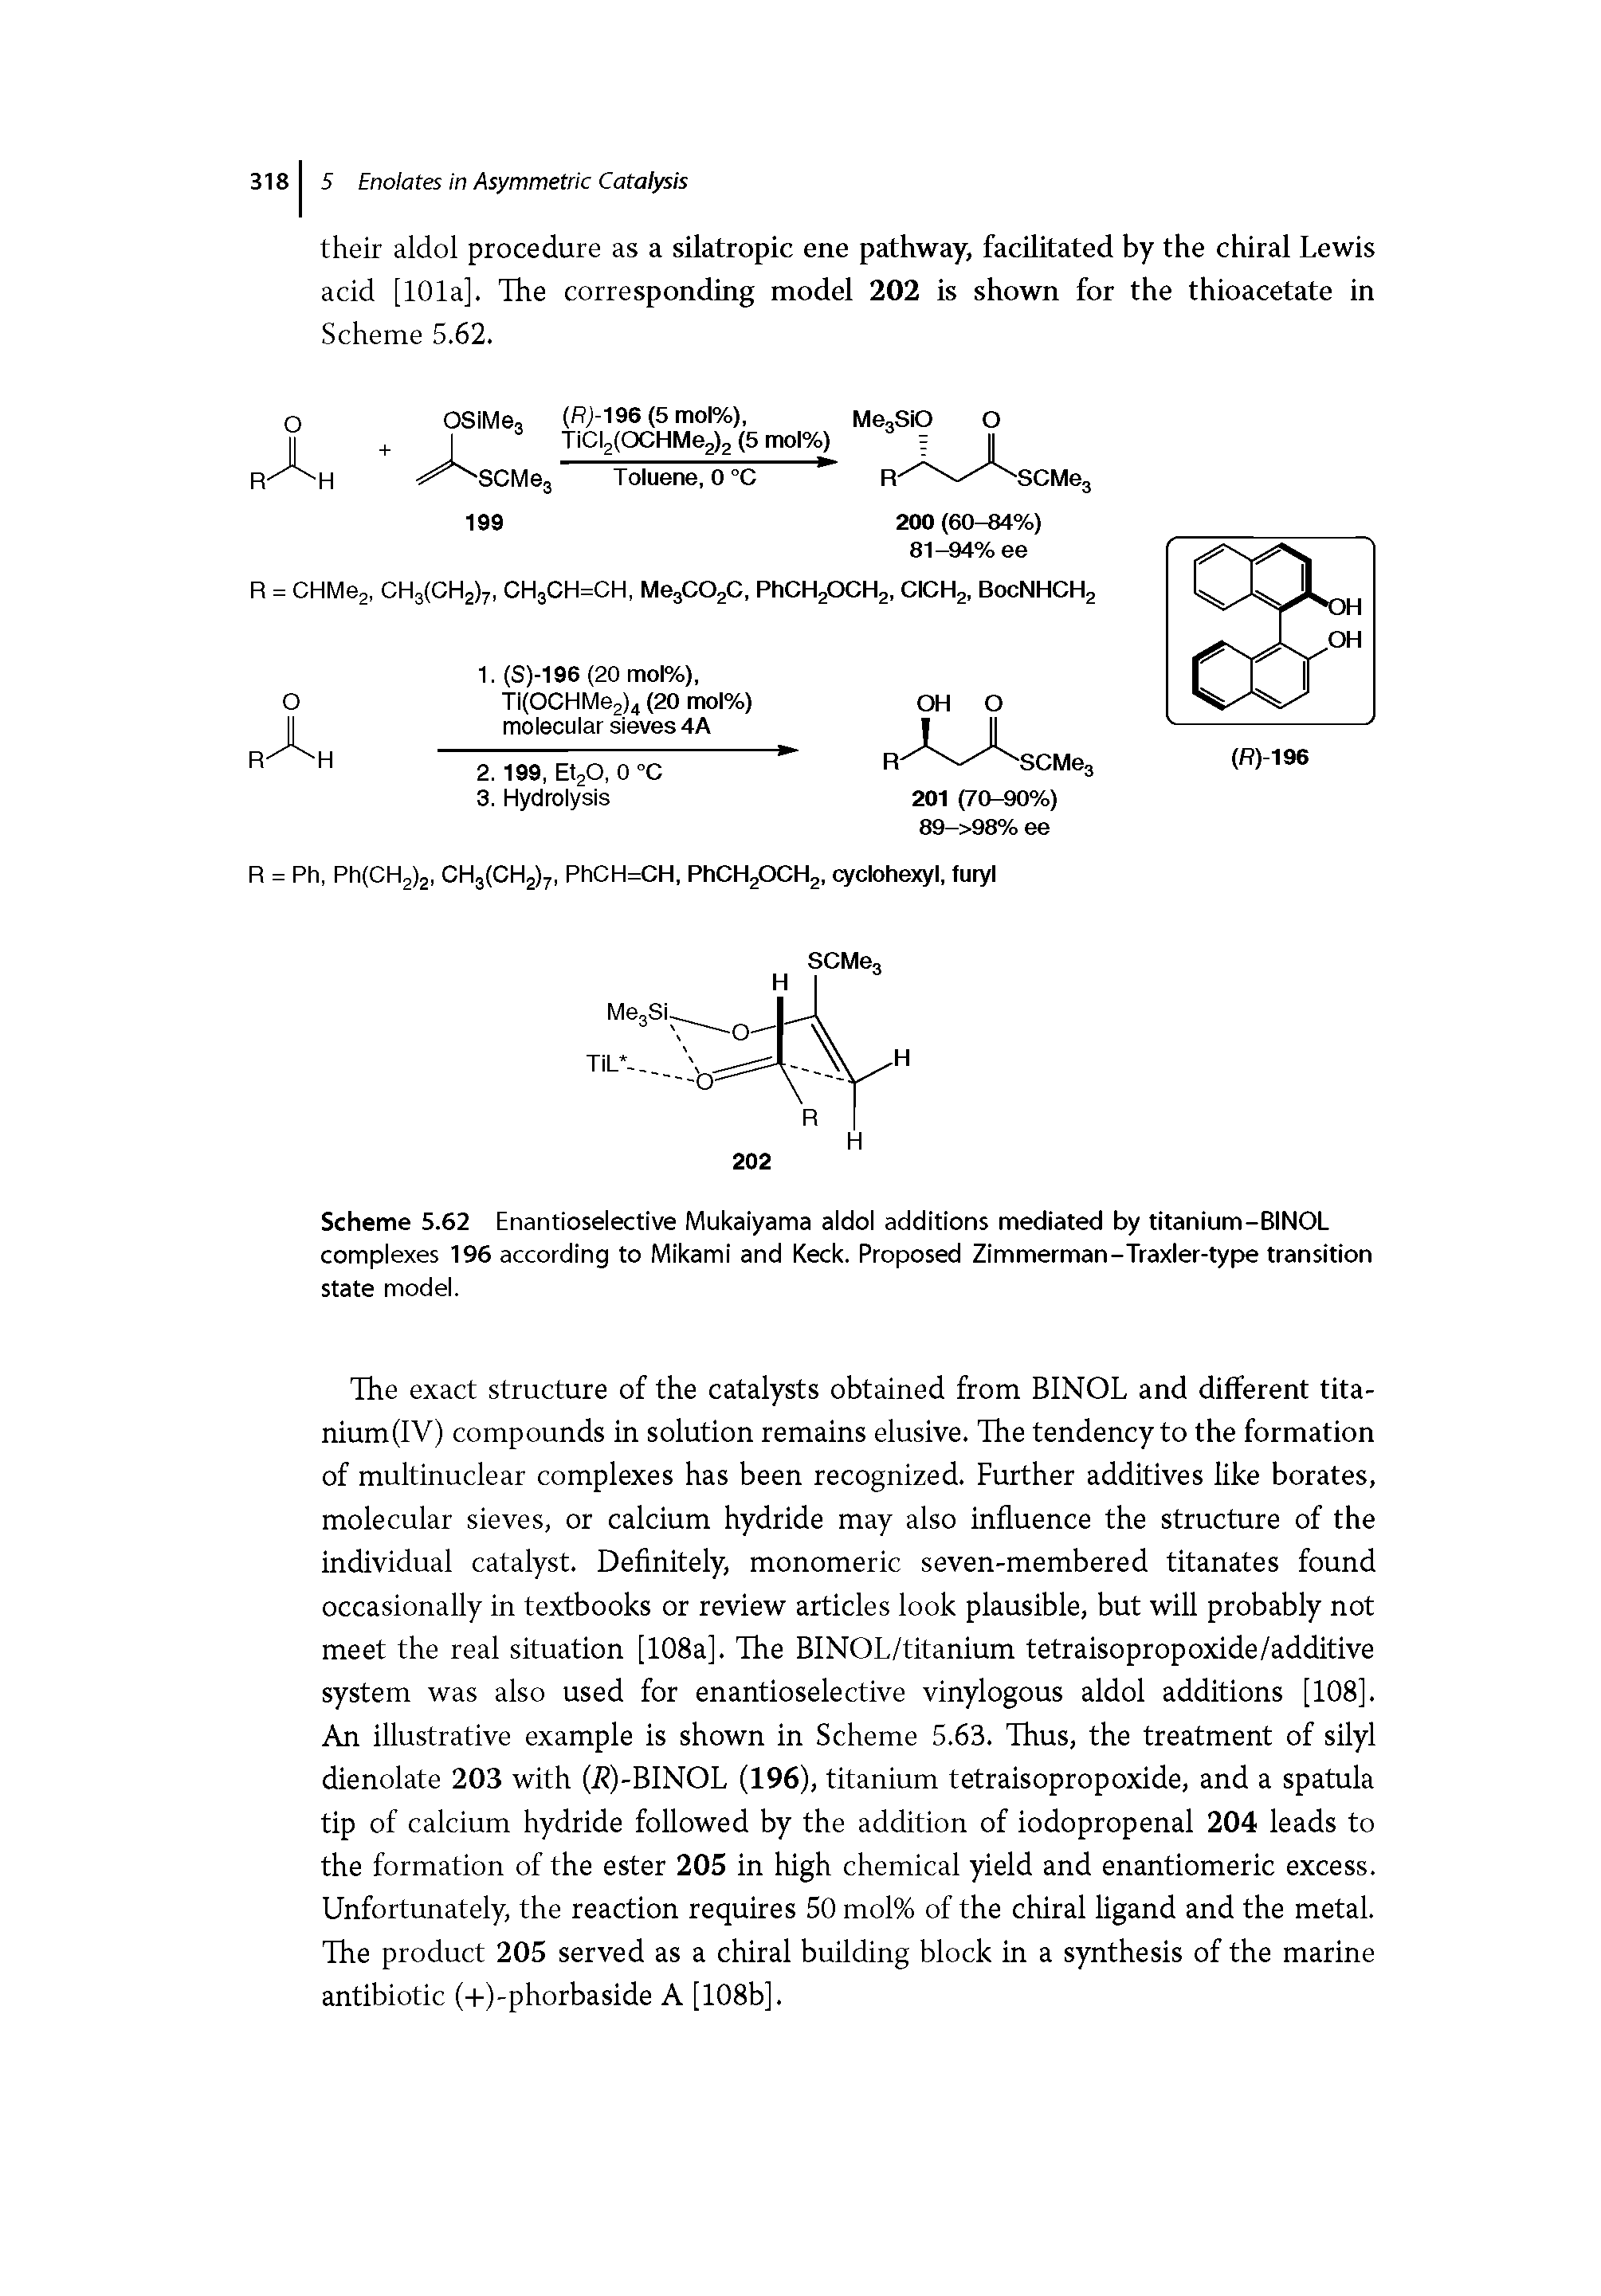 Scheme 5.62 Enantioselective Mukaiyama aldol additions mediated by titanium-BINOL complexes 196 according to Mikami and Keck. Proposed Zimmerman-Traxler-type transition state model.